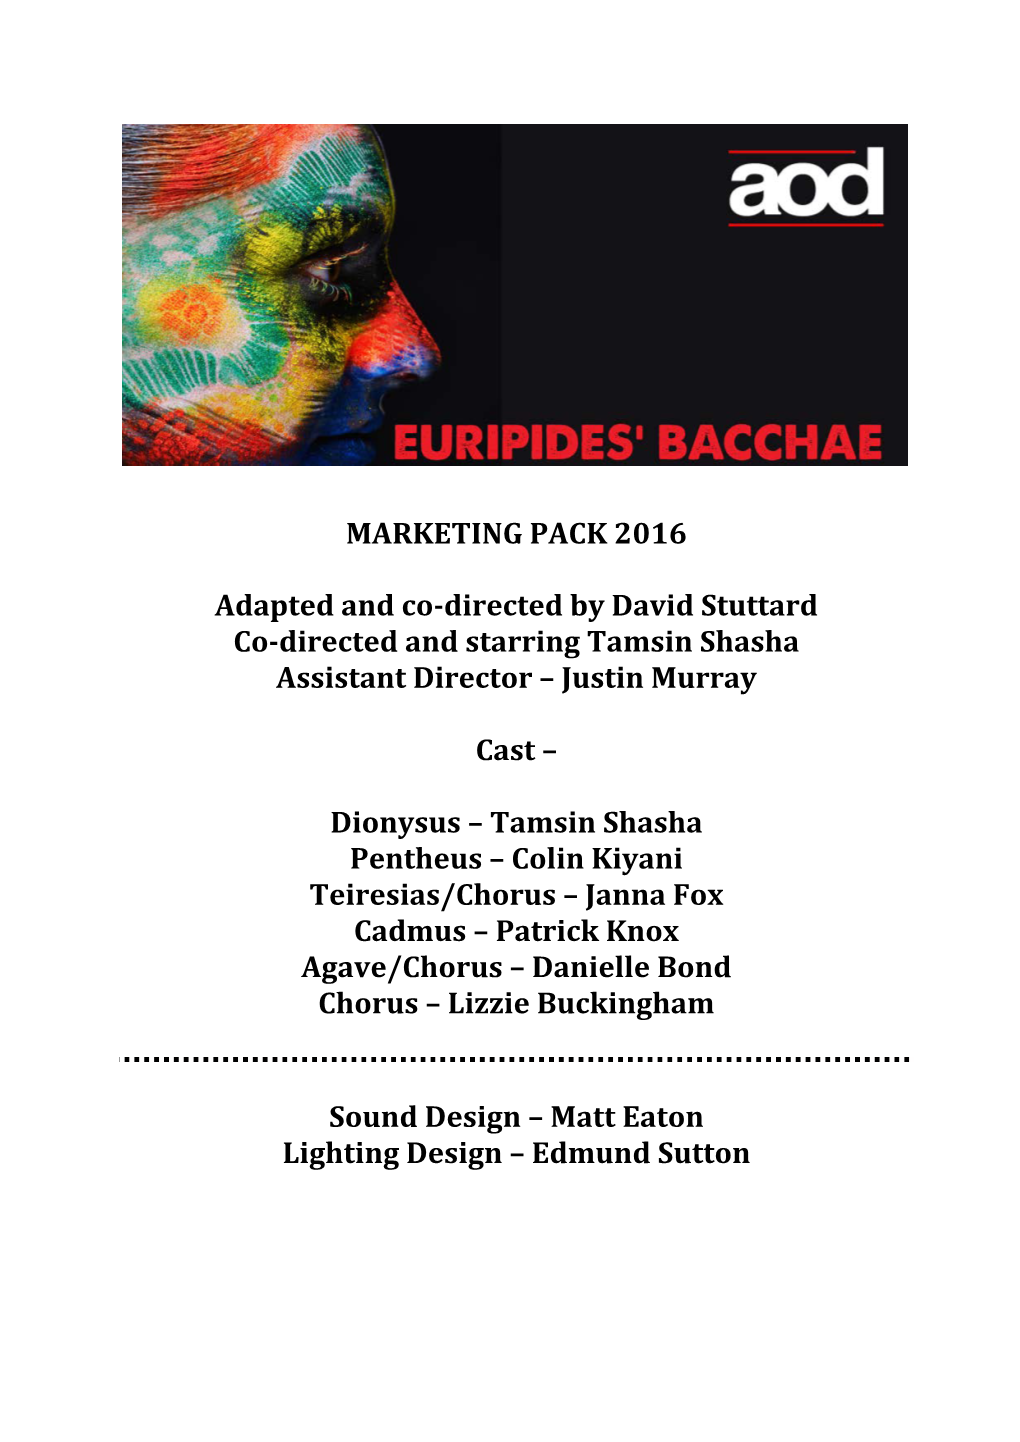 MARKETING PACK 2016 Adapted and Co-Directed by David Stuttard